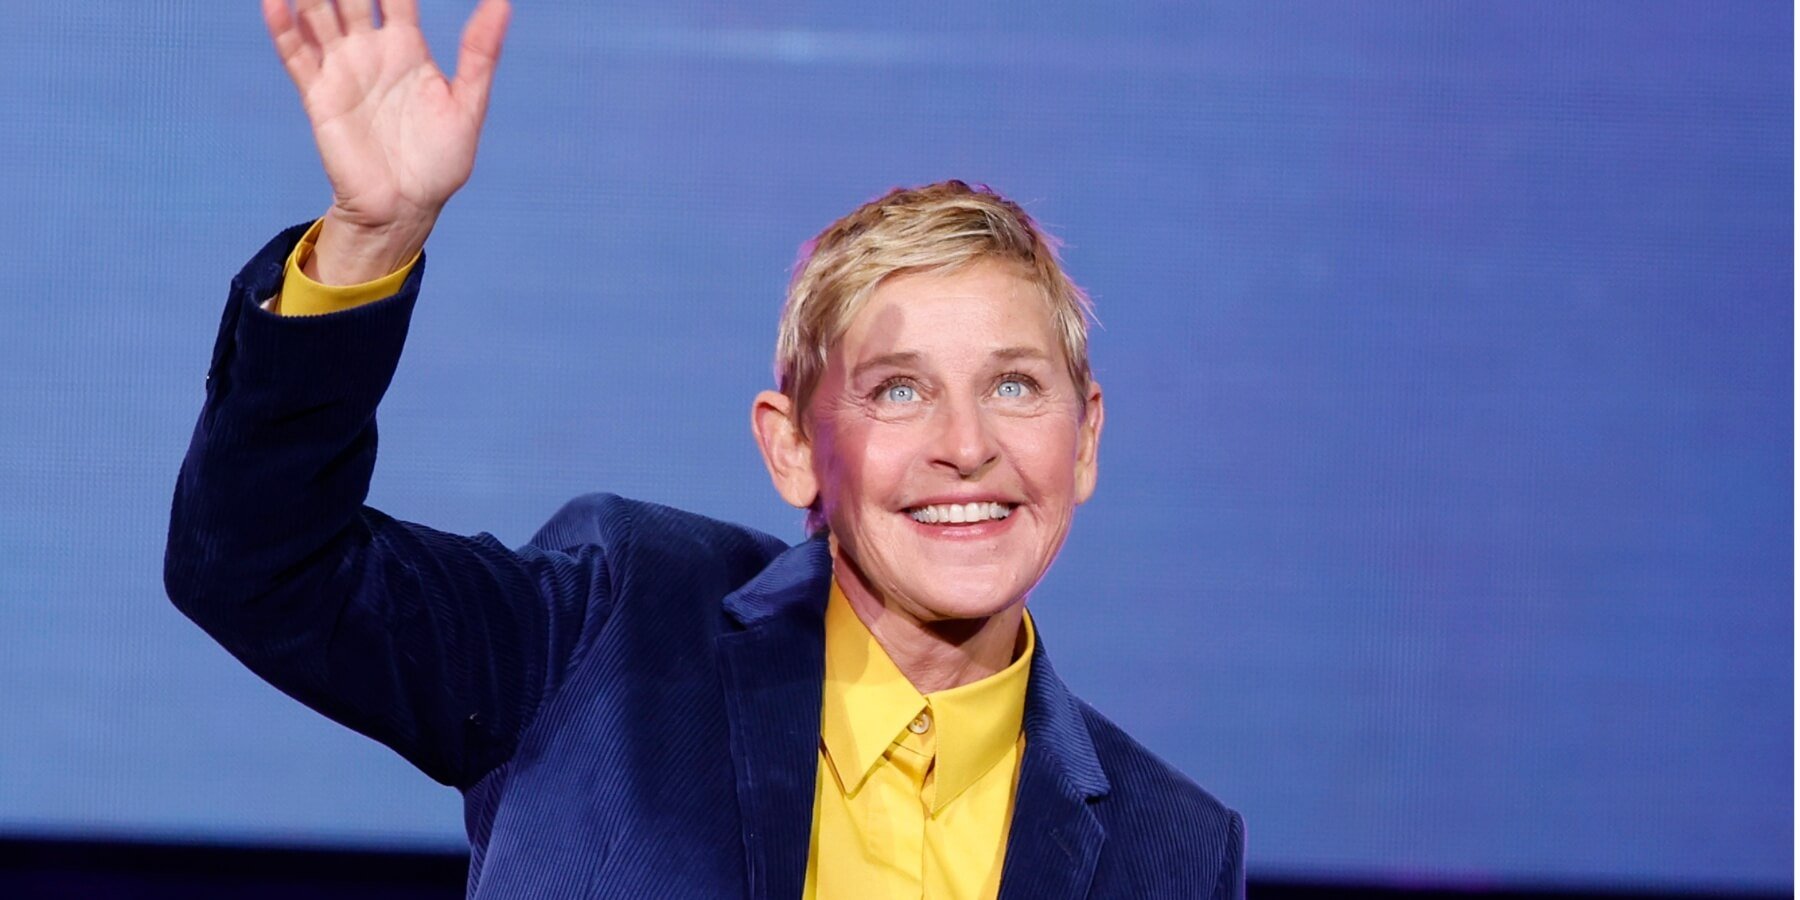 A body language expert analyzed Ellen DeGeneres' recent commentary and actions.